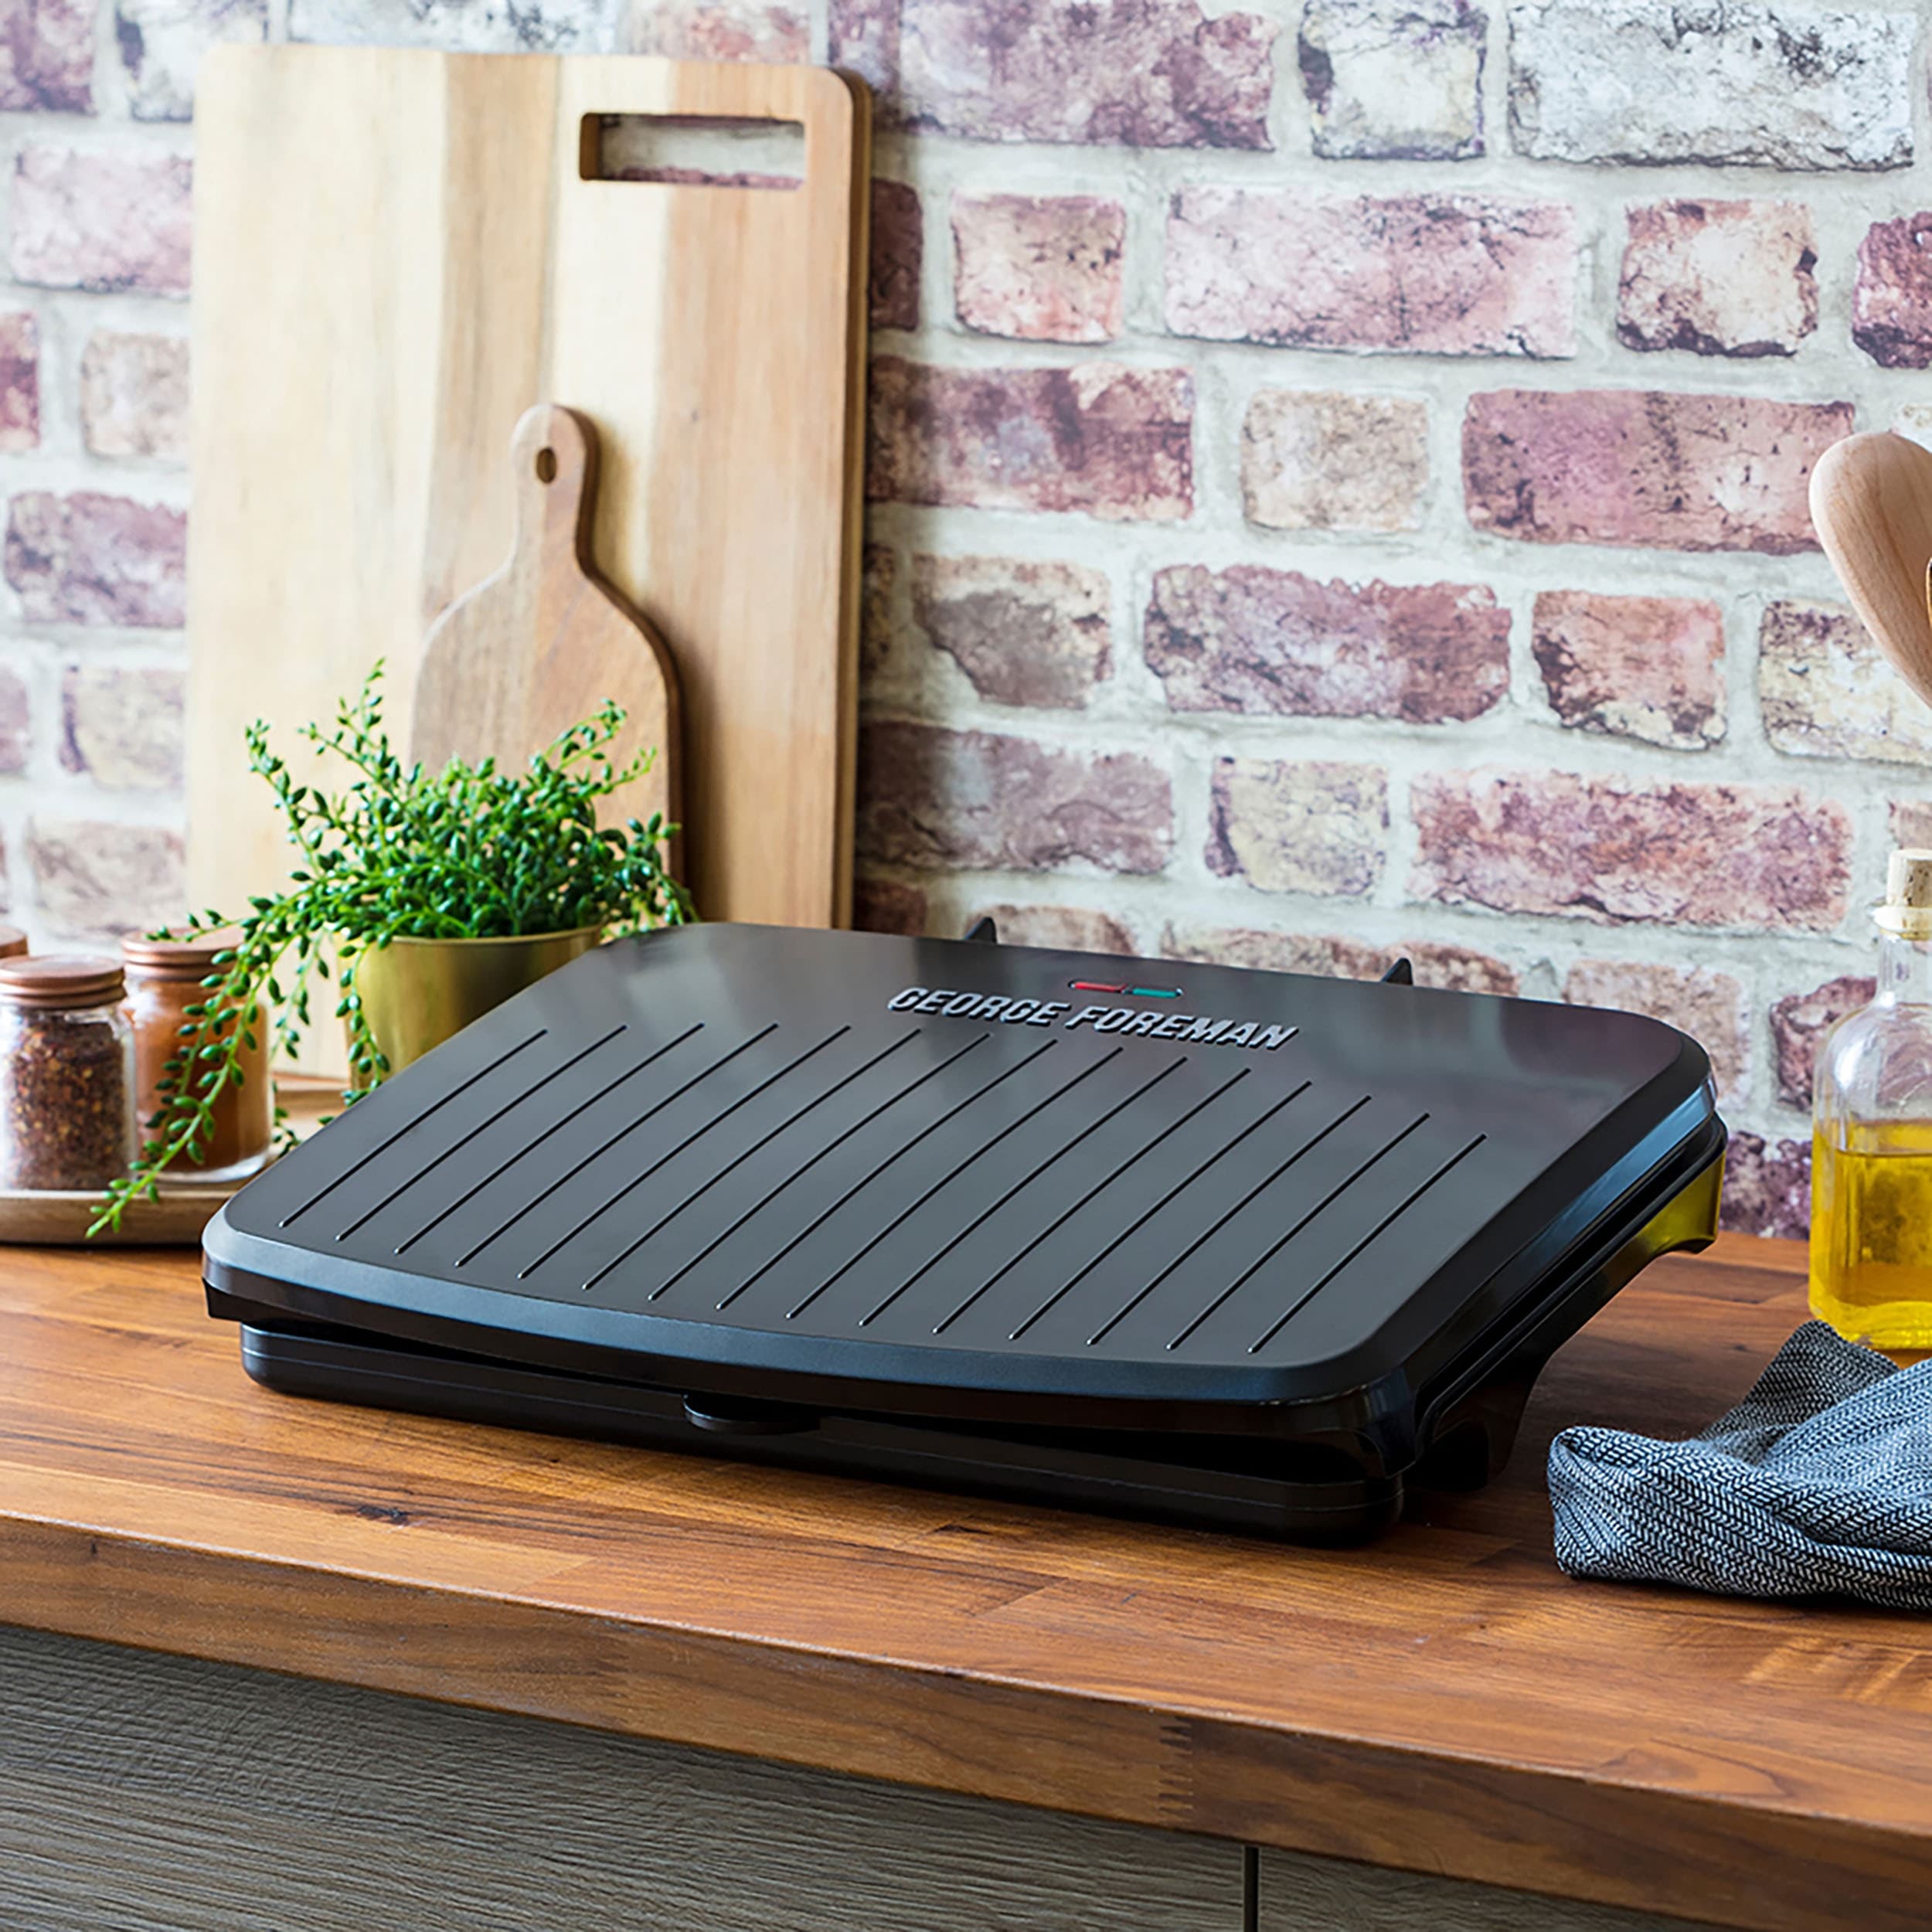 https://ak1.ostkcdn.com/images/products/is/images/direct/4f554c96f35ba40abf301cdf19b013539b087fec/George-Foreman-9-Serving-Classic-Plate-Electric-Indoor-Grill-and-Panini-Press-in-Gunmetal-Grey.jpg